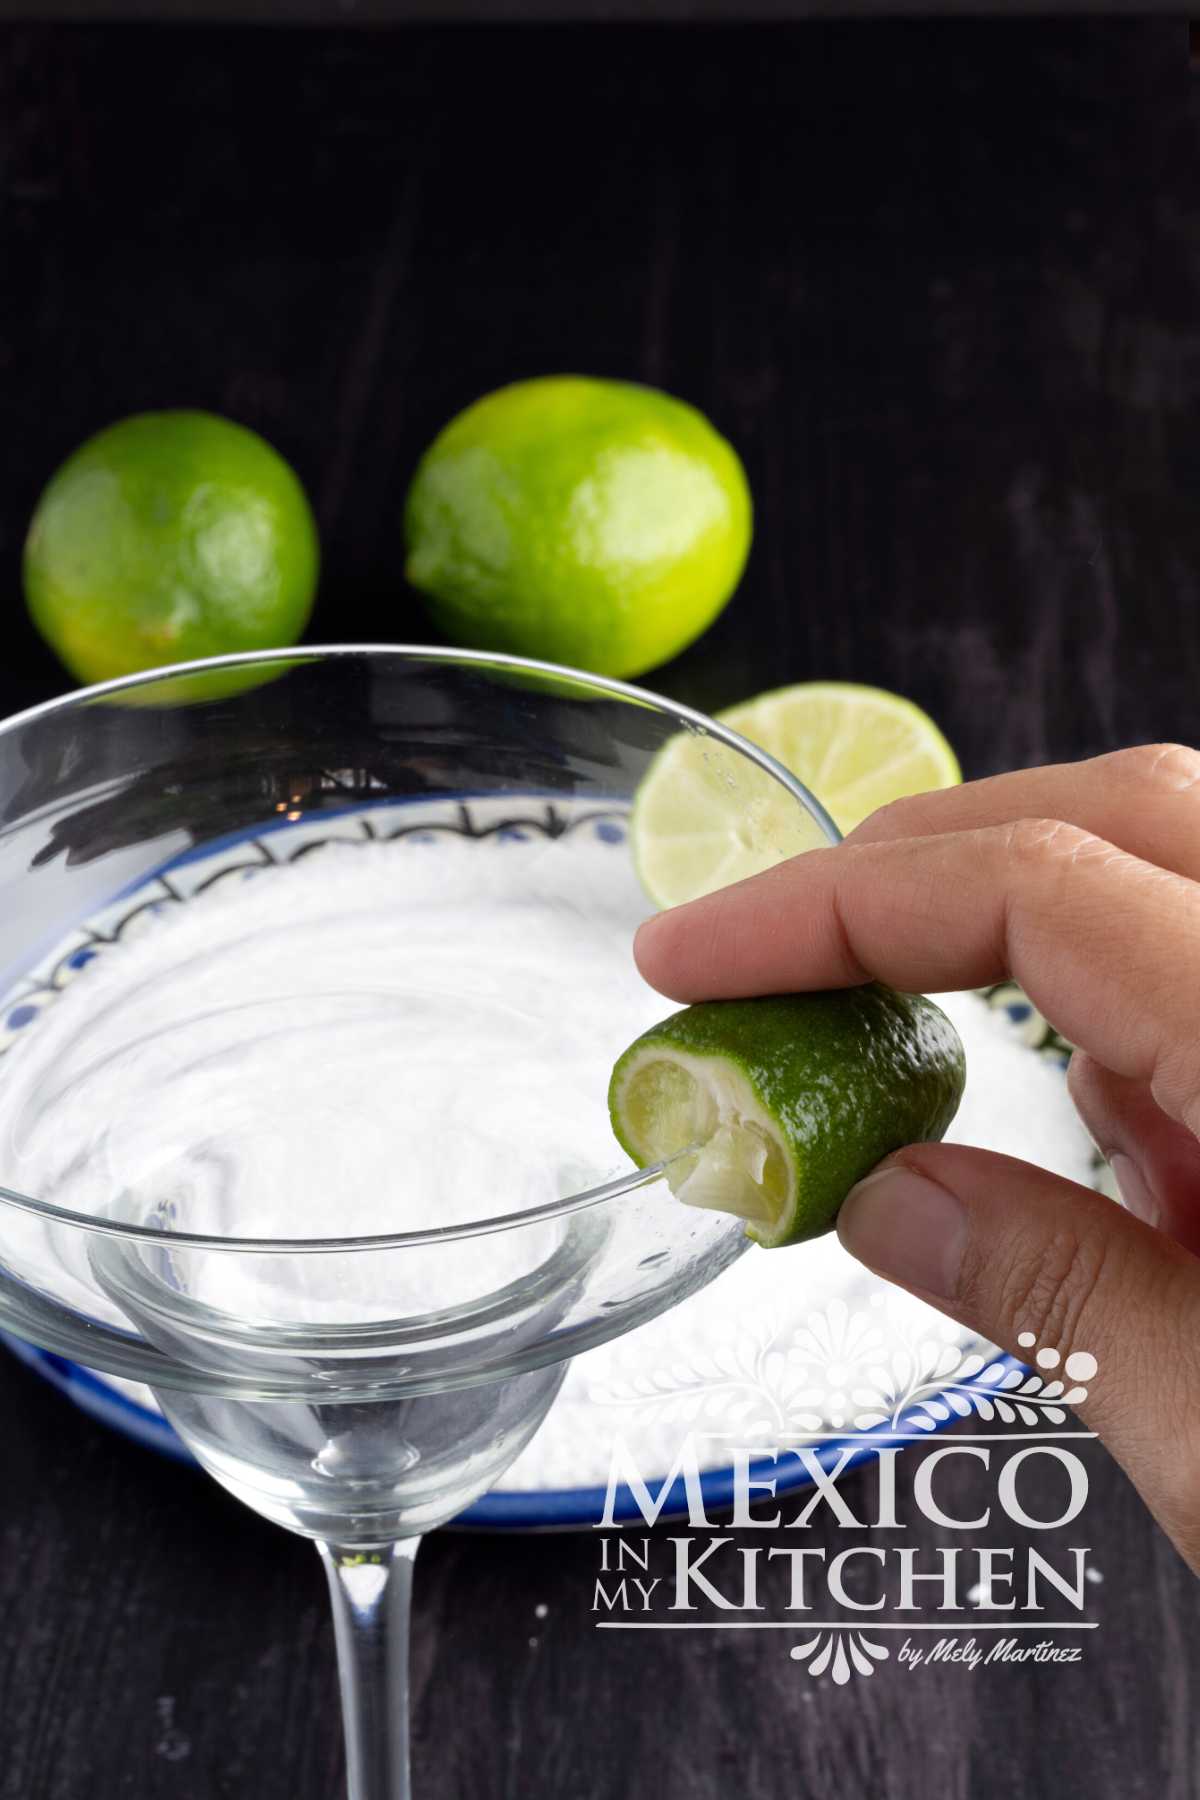 Rubbing a lime wedge over the margarita rim.